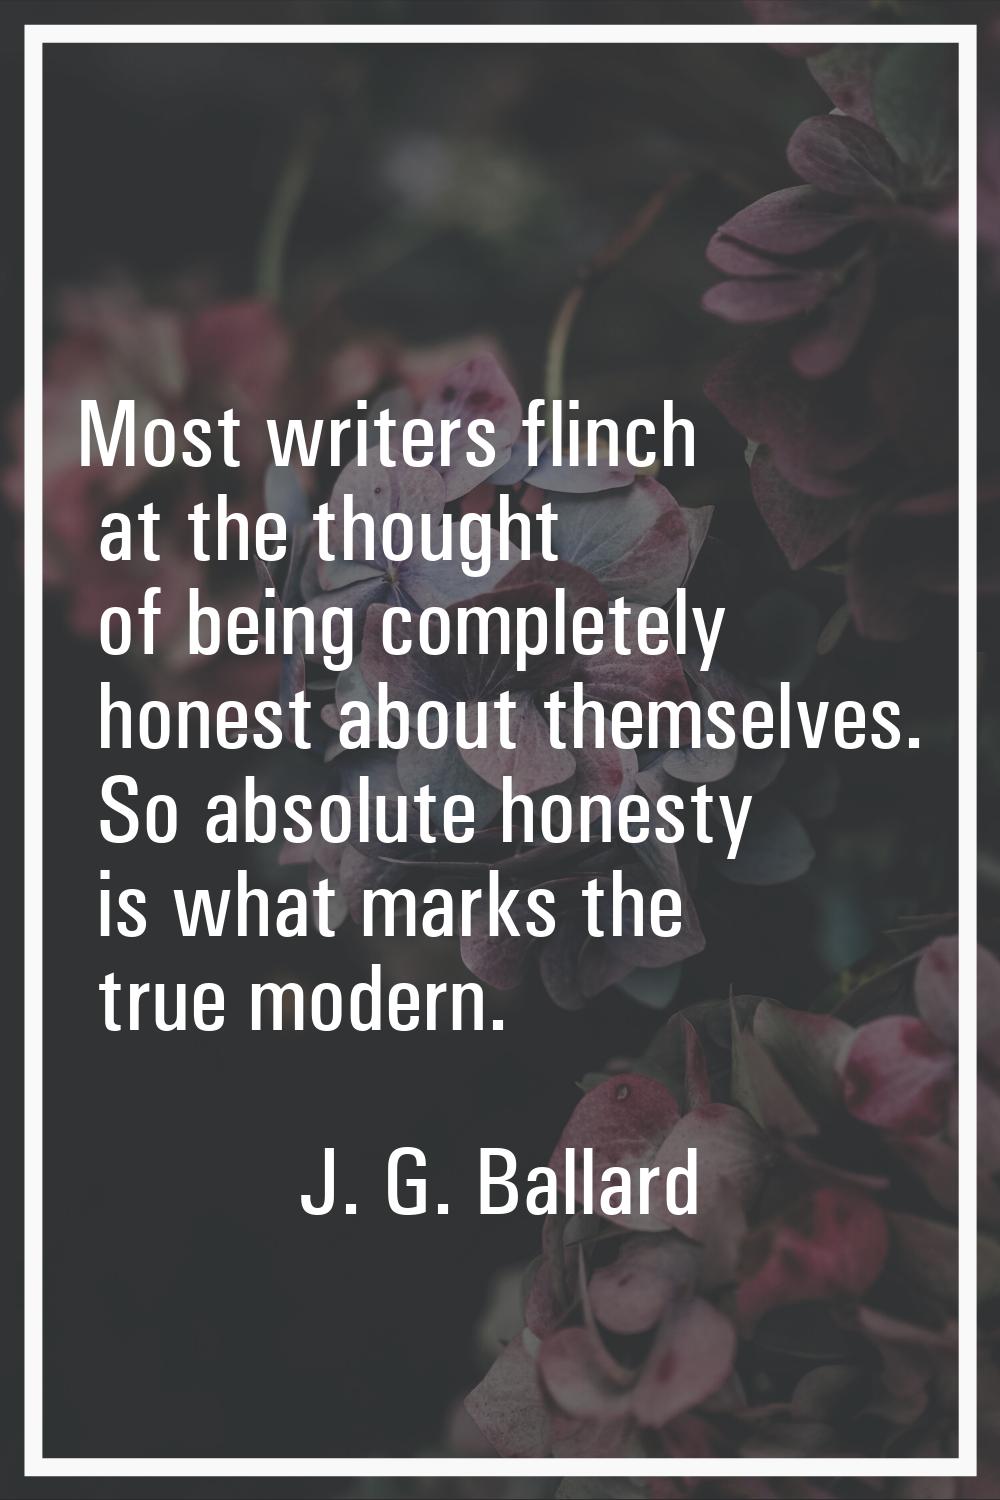 Most writers flinch at the thought of being completely honest about themselves. So absolute honesty